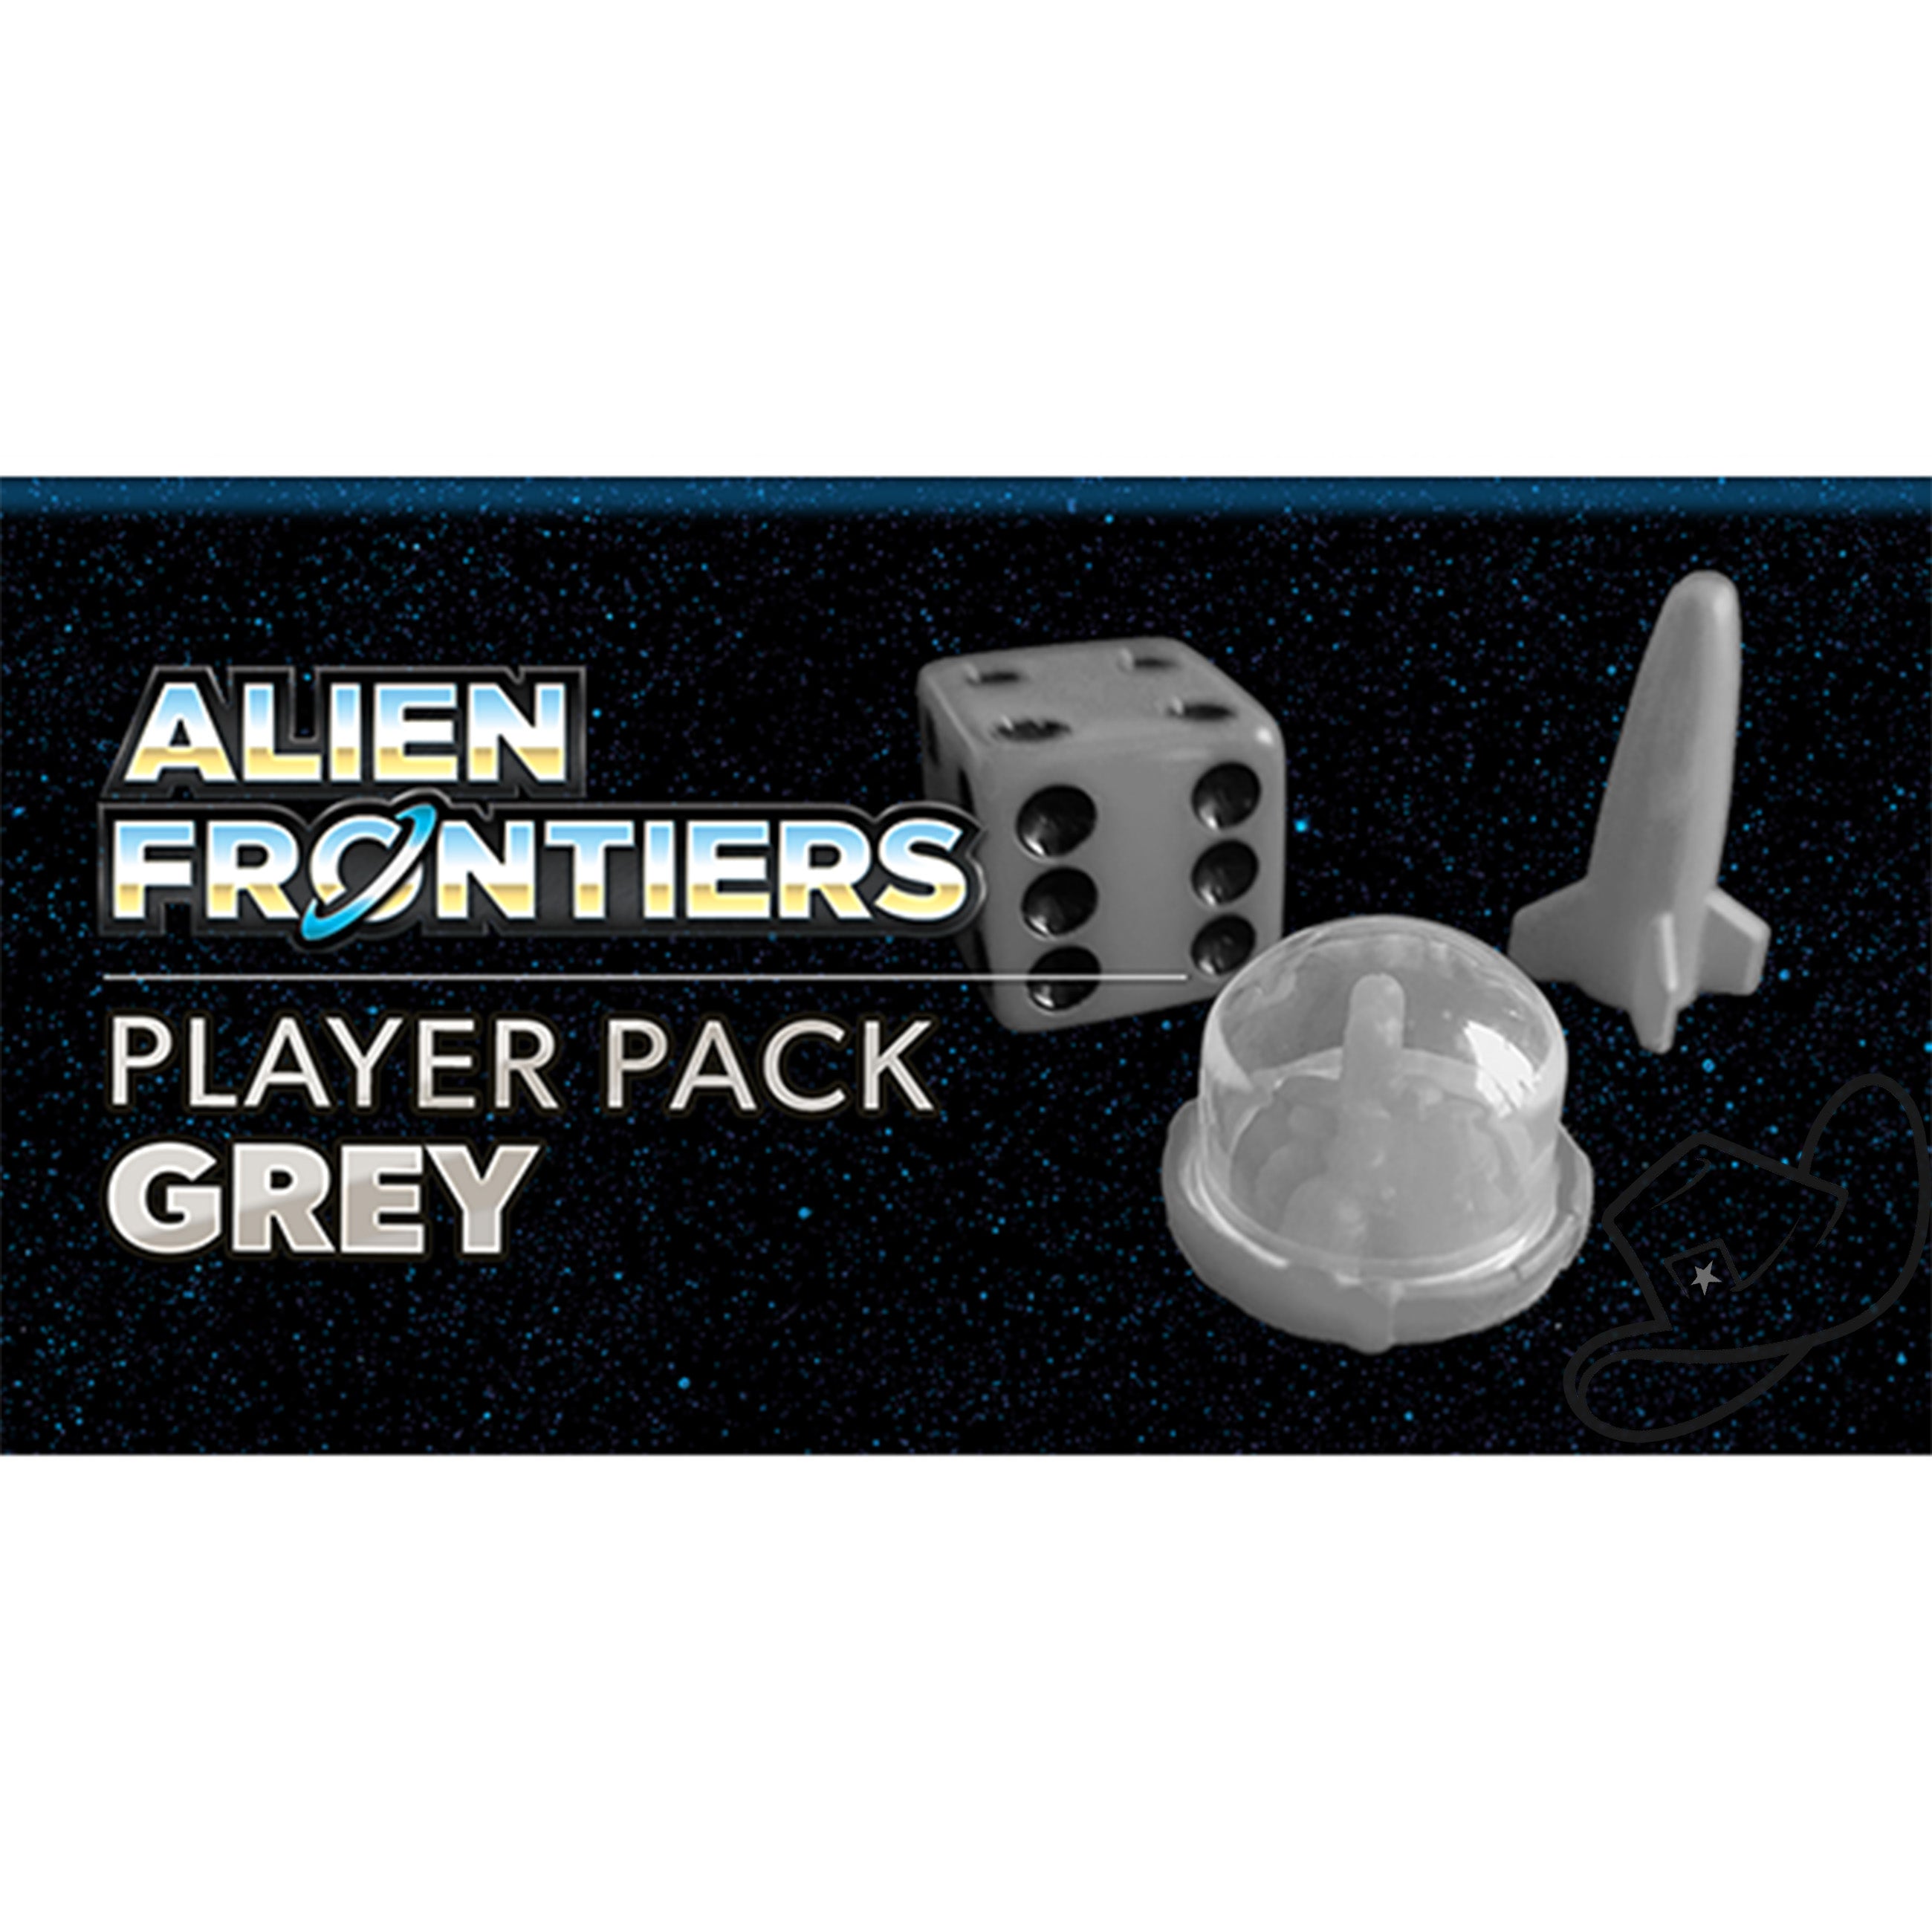 Alien frontiers players pack grey contains all the pieces needed to add a new player